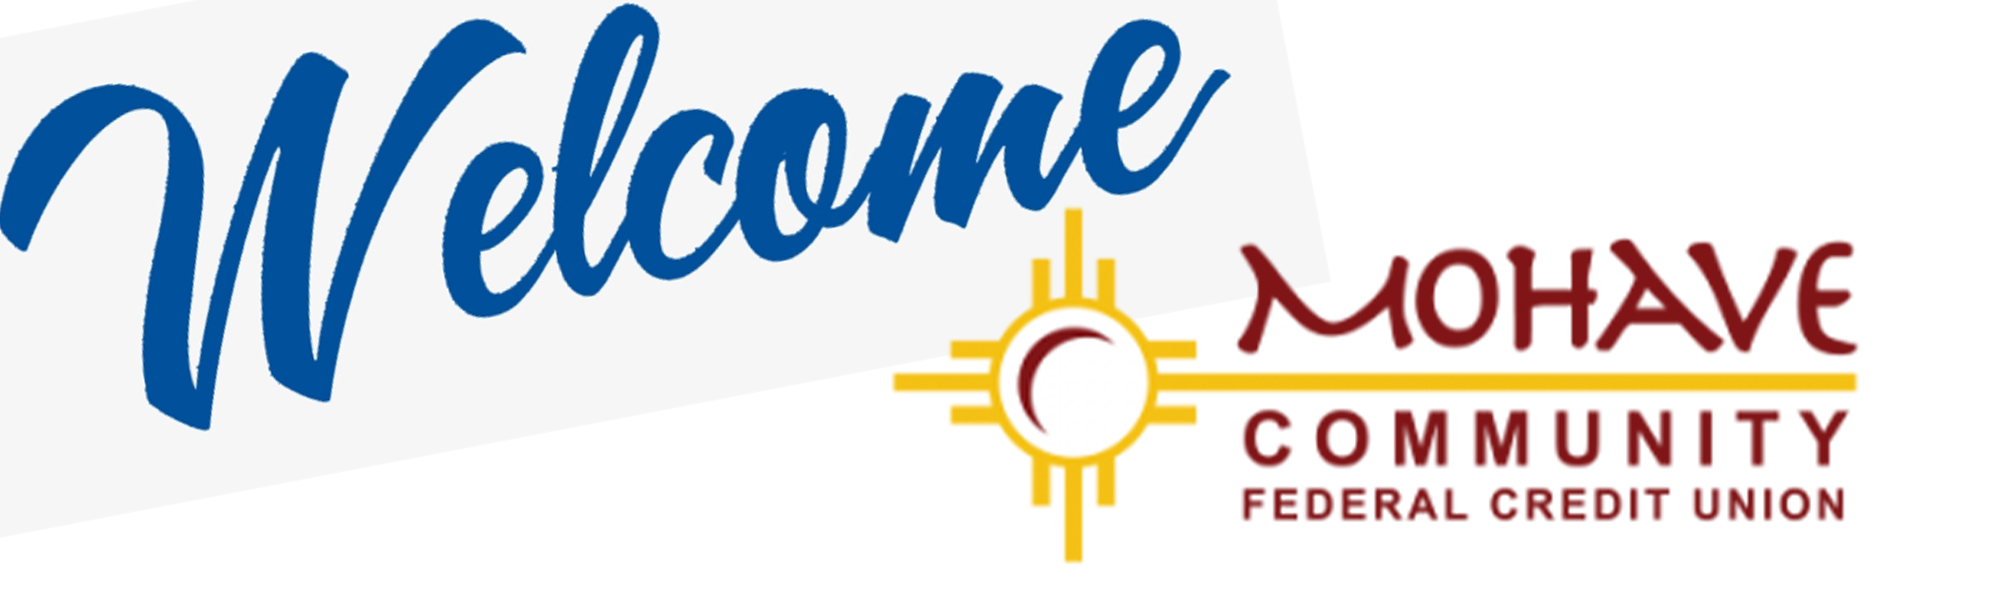 Welcome to Mohave Community Federal Credit Union